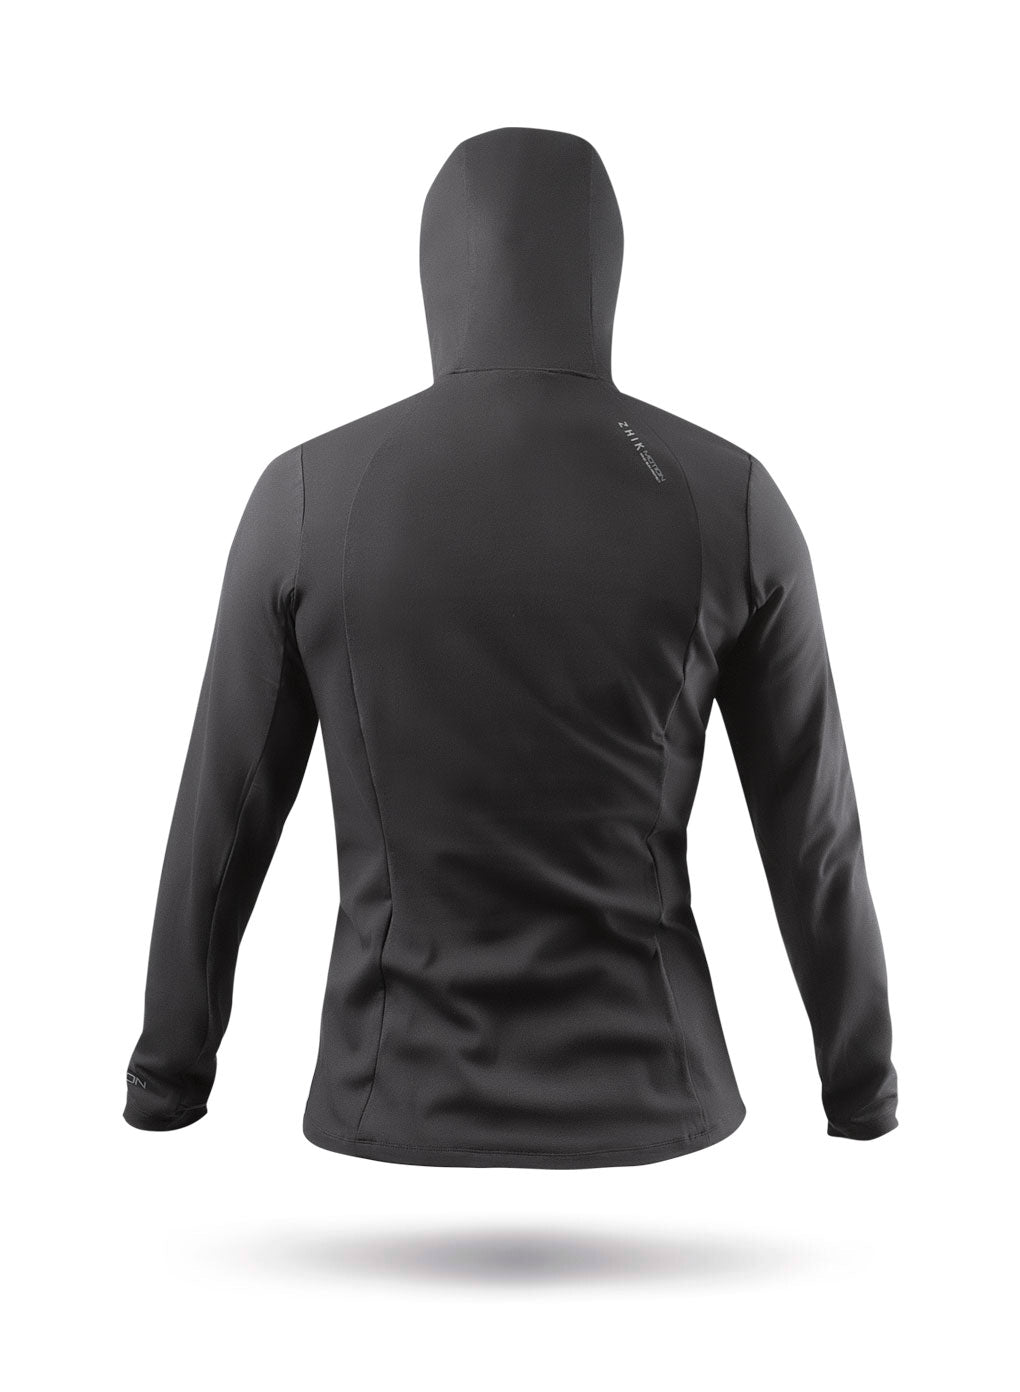 Womens Black ZhikMotion Hooded Top